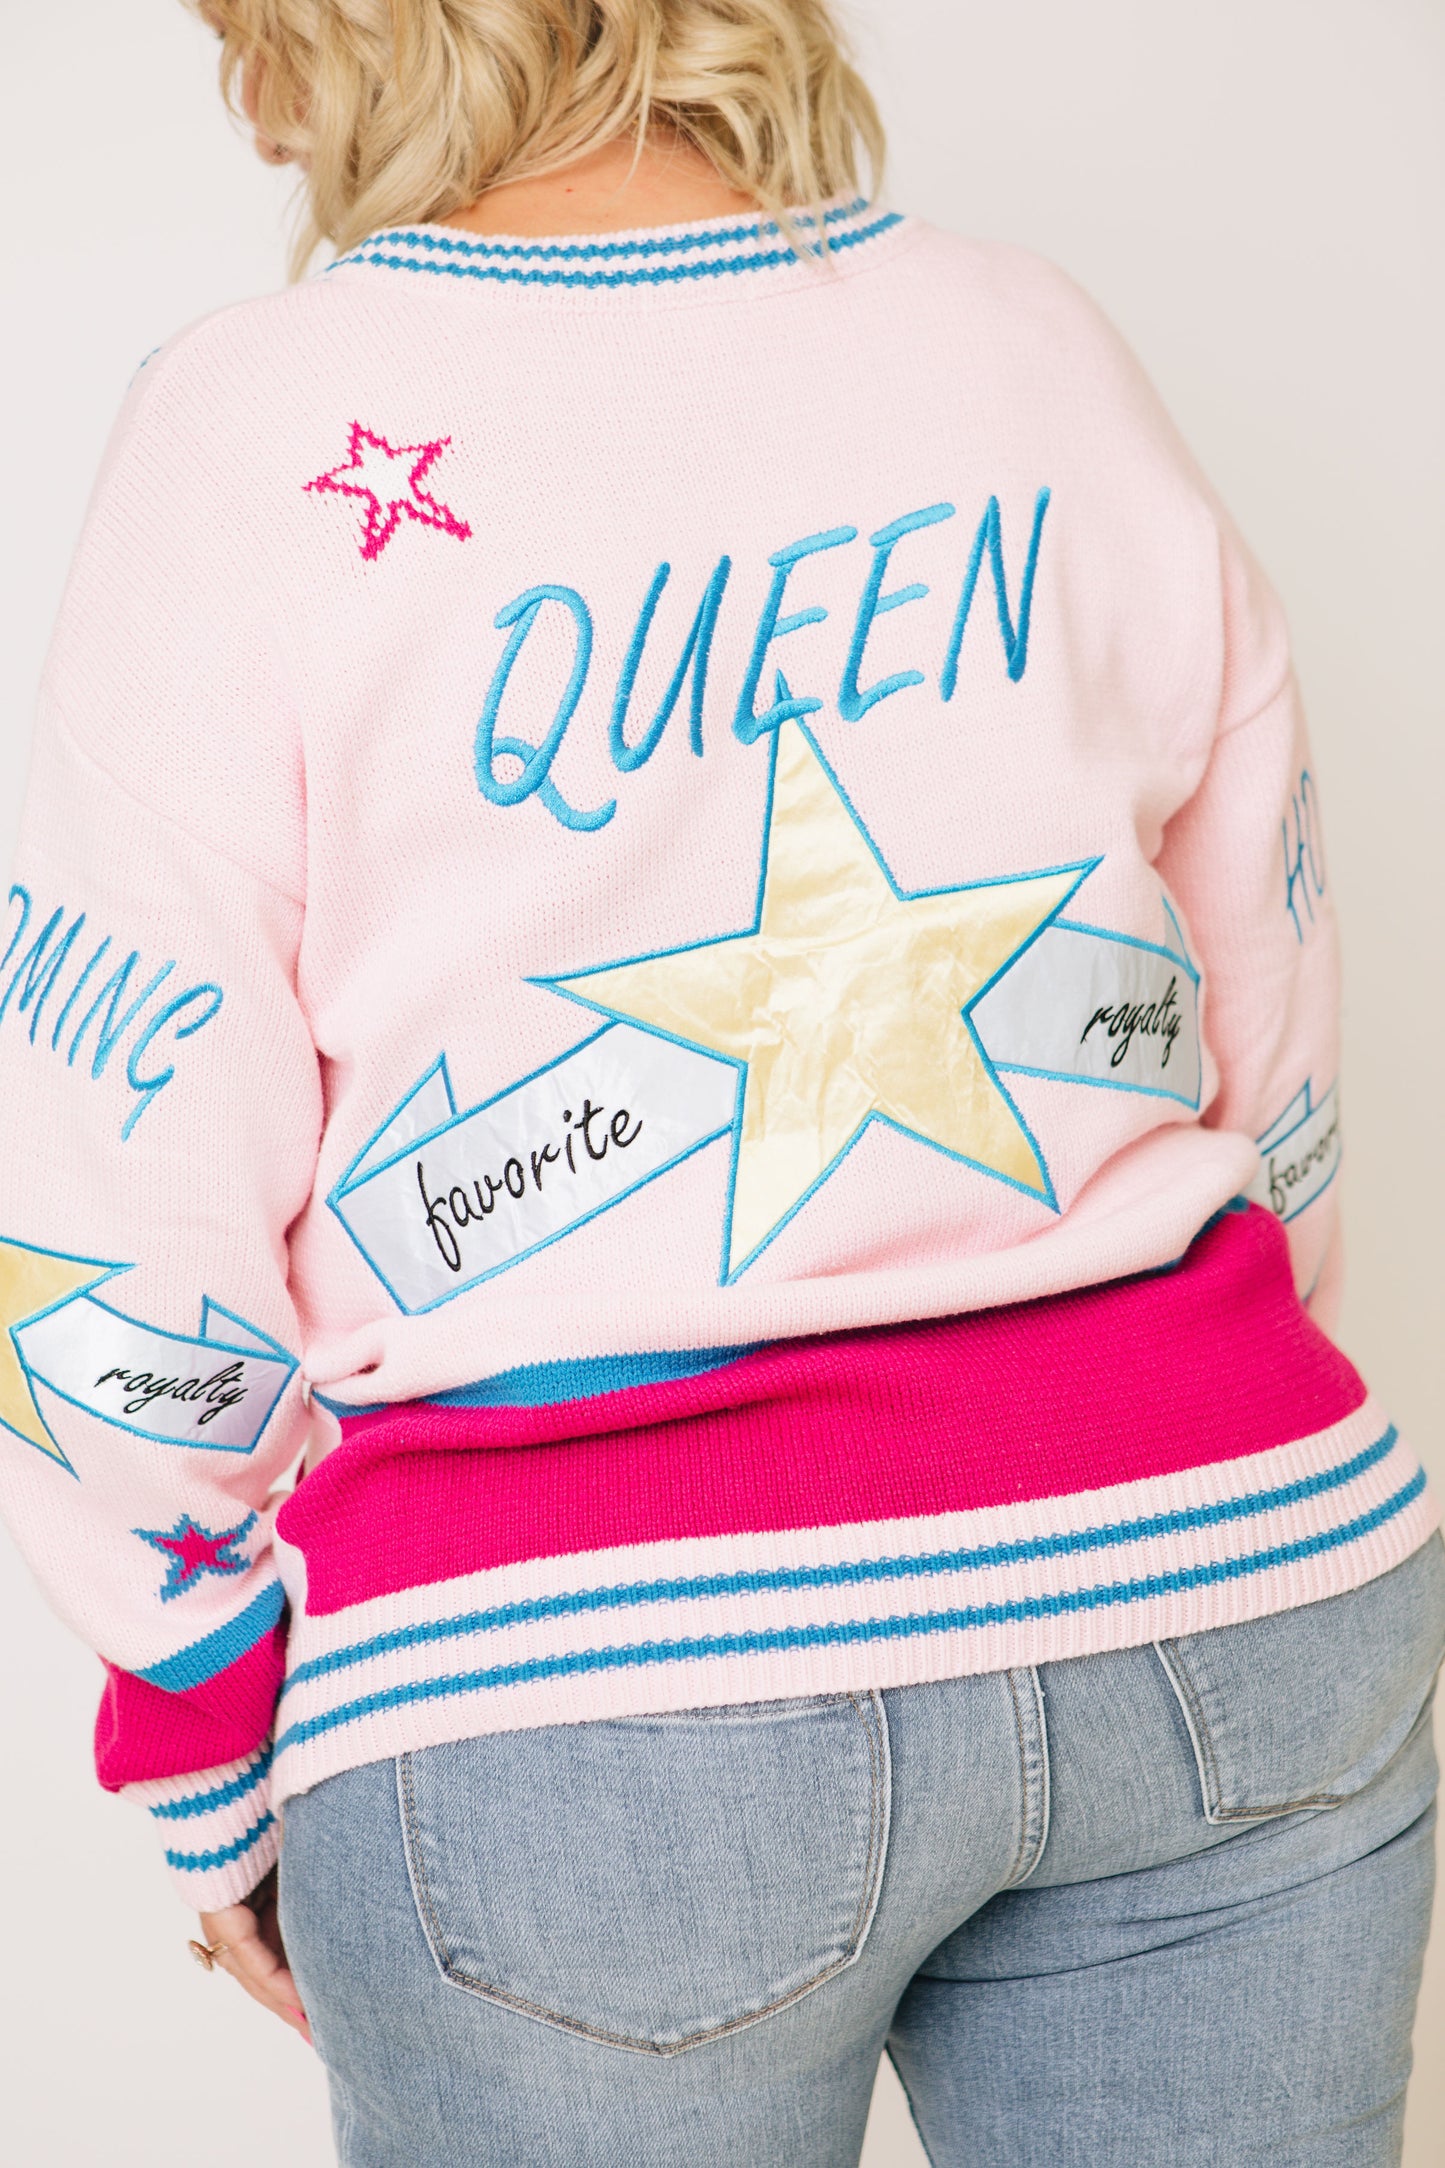 Homecoming Queen Patch Cardigan (Fits S-2XL)